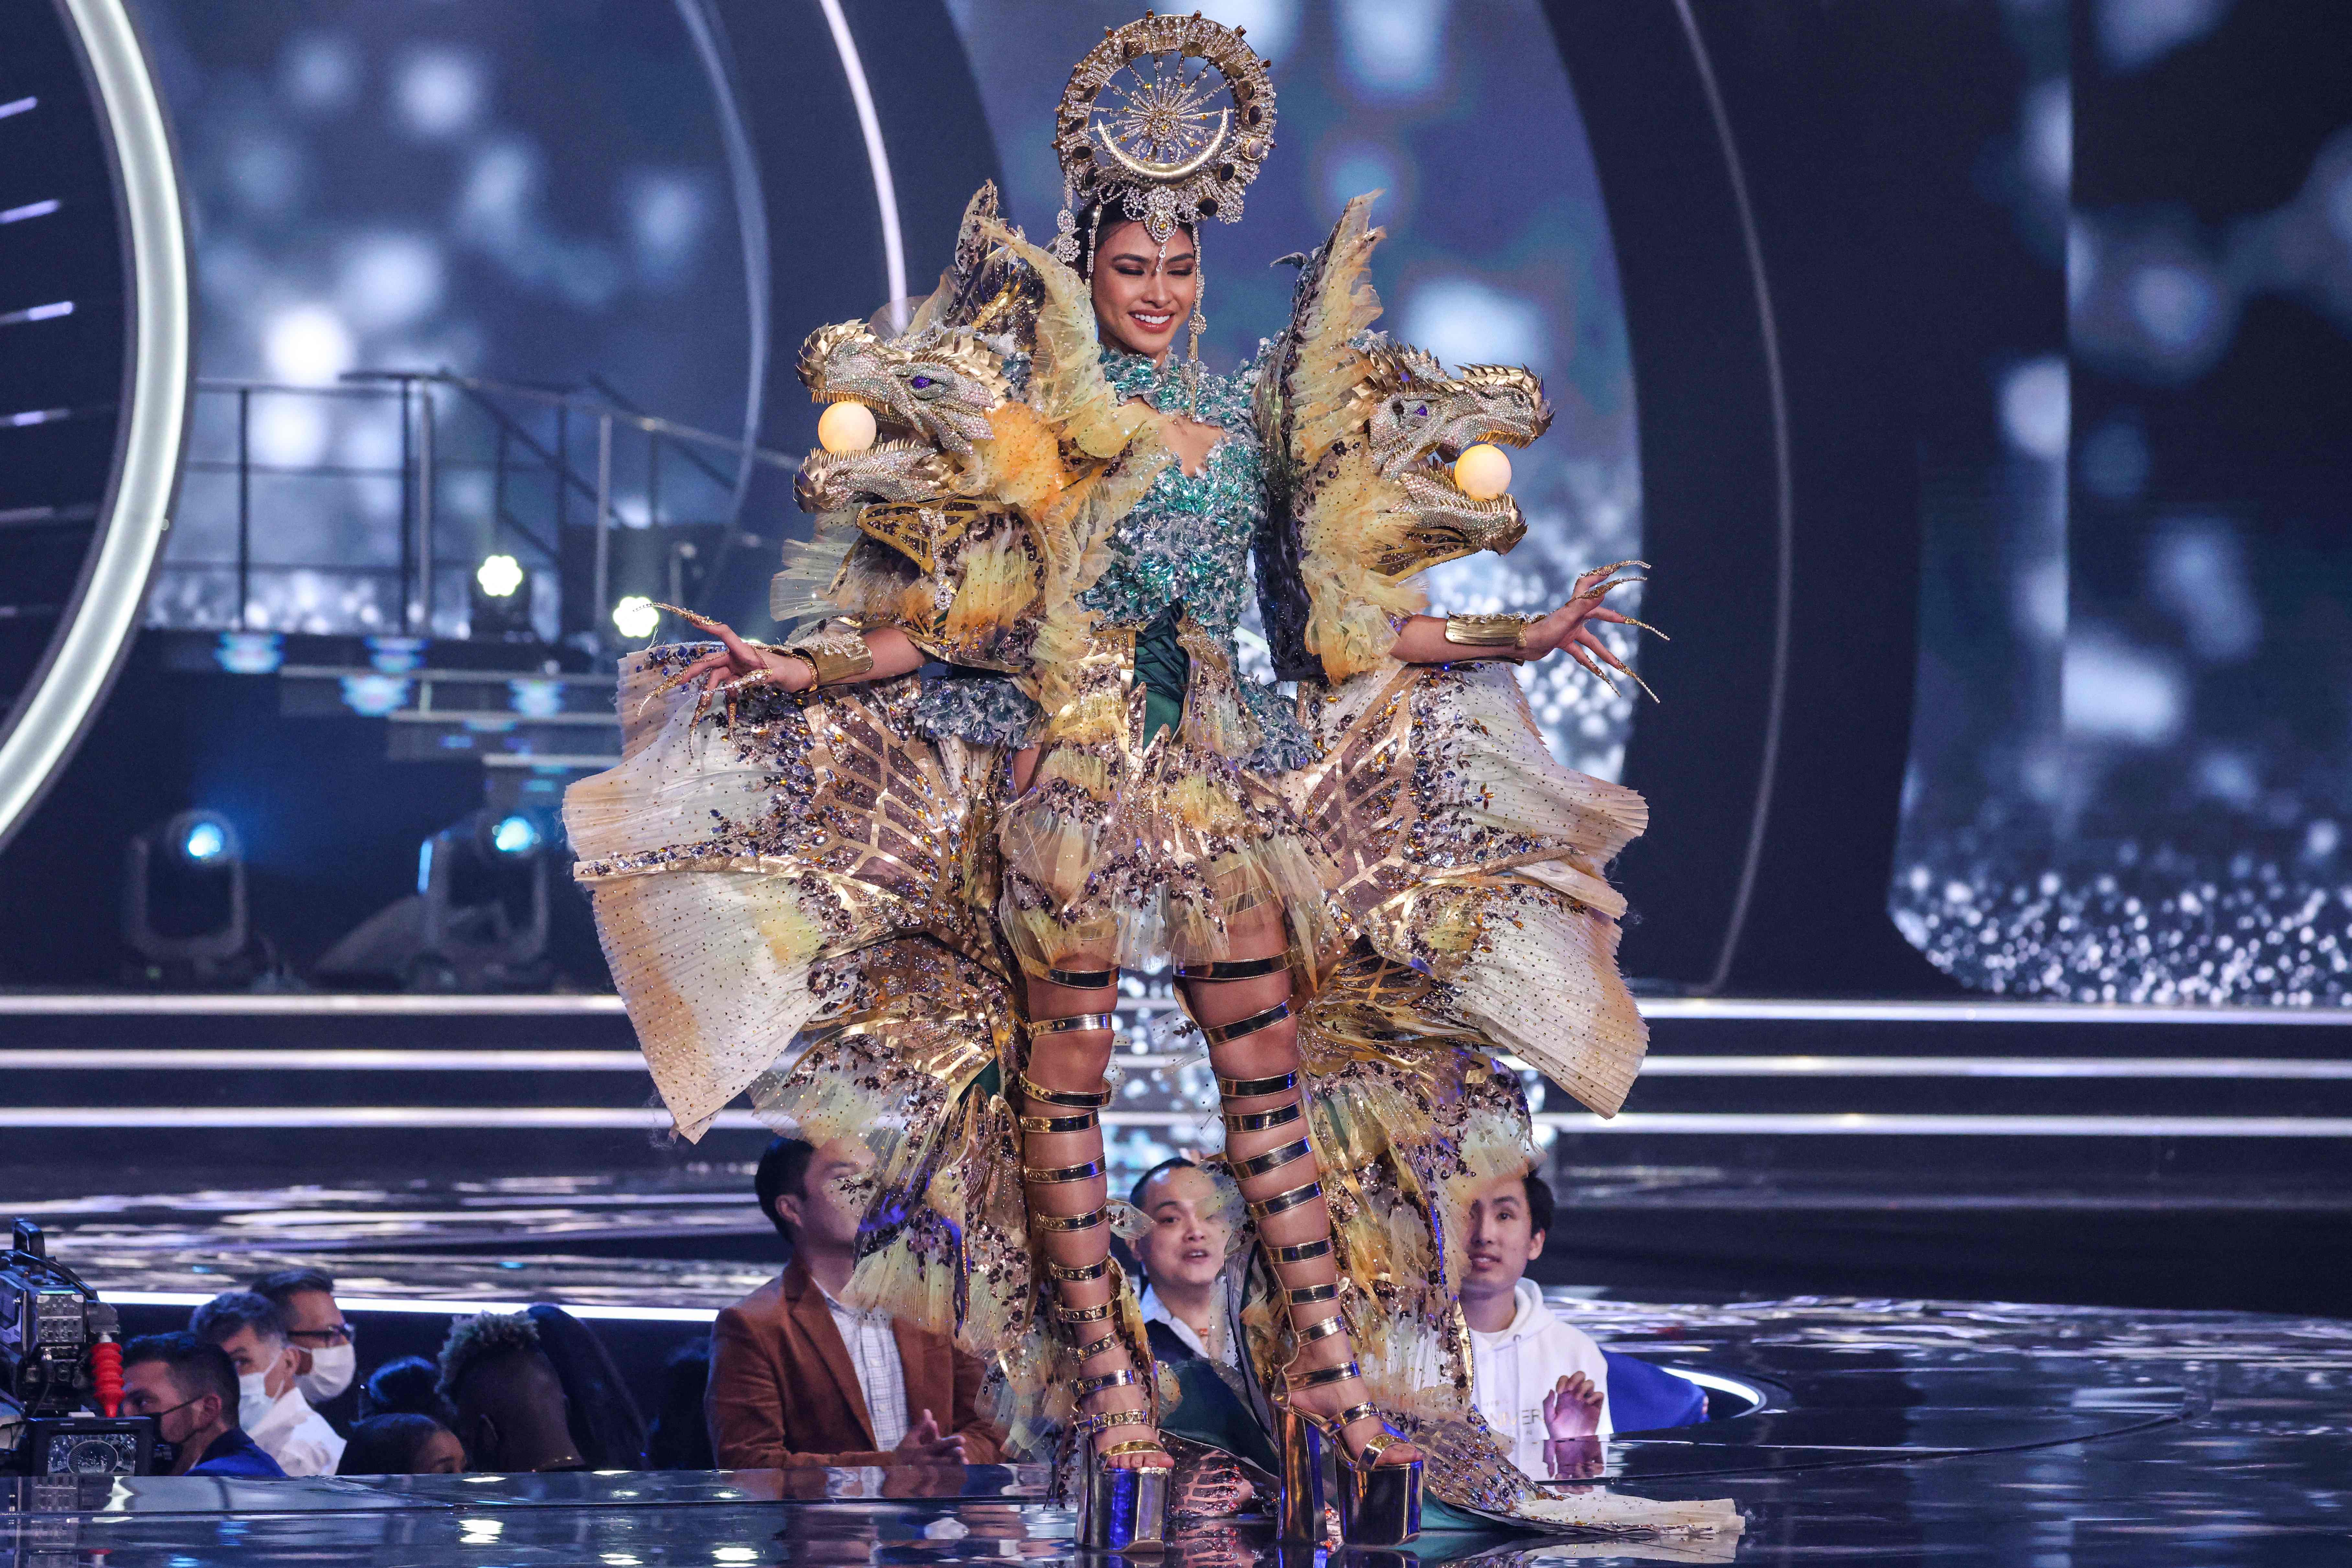 Dazzling Miss Universe 21 National Costumes Who Wore What